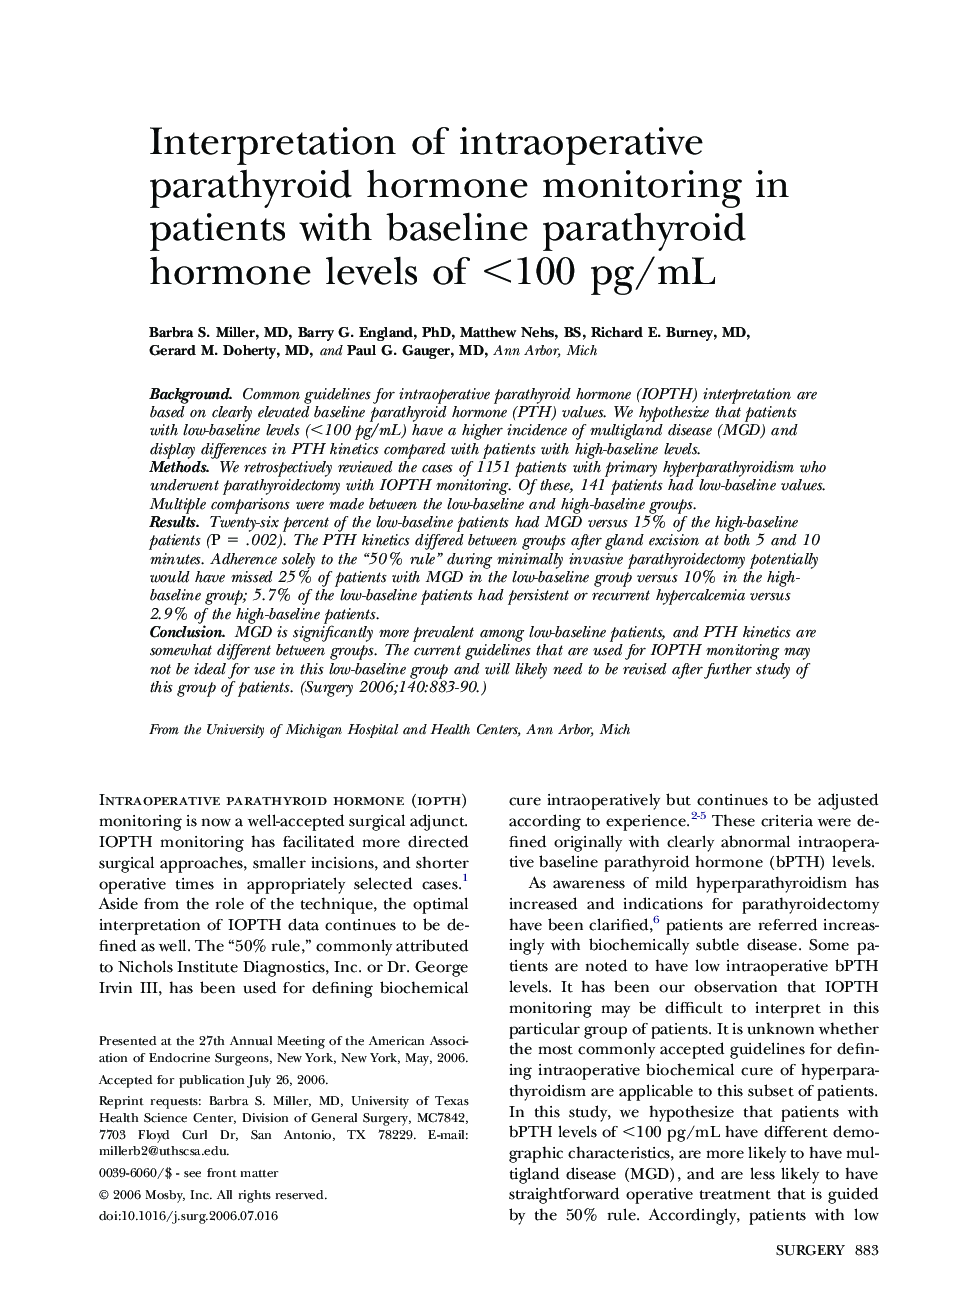 Interpretation of intraoperative parathyroid hormone monitoring in patients with baseline parathyroid hormone levels of <100 pg/mL